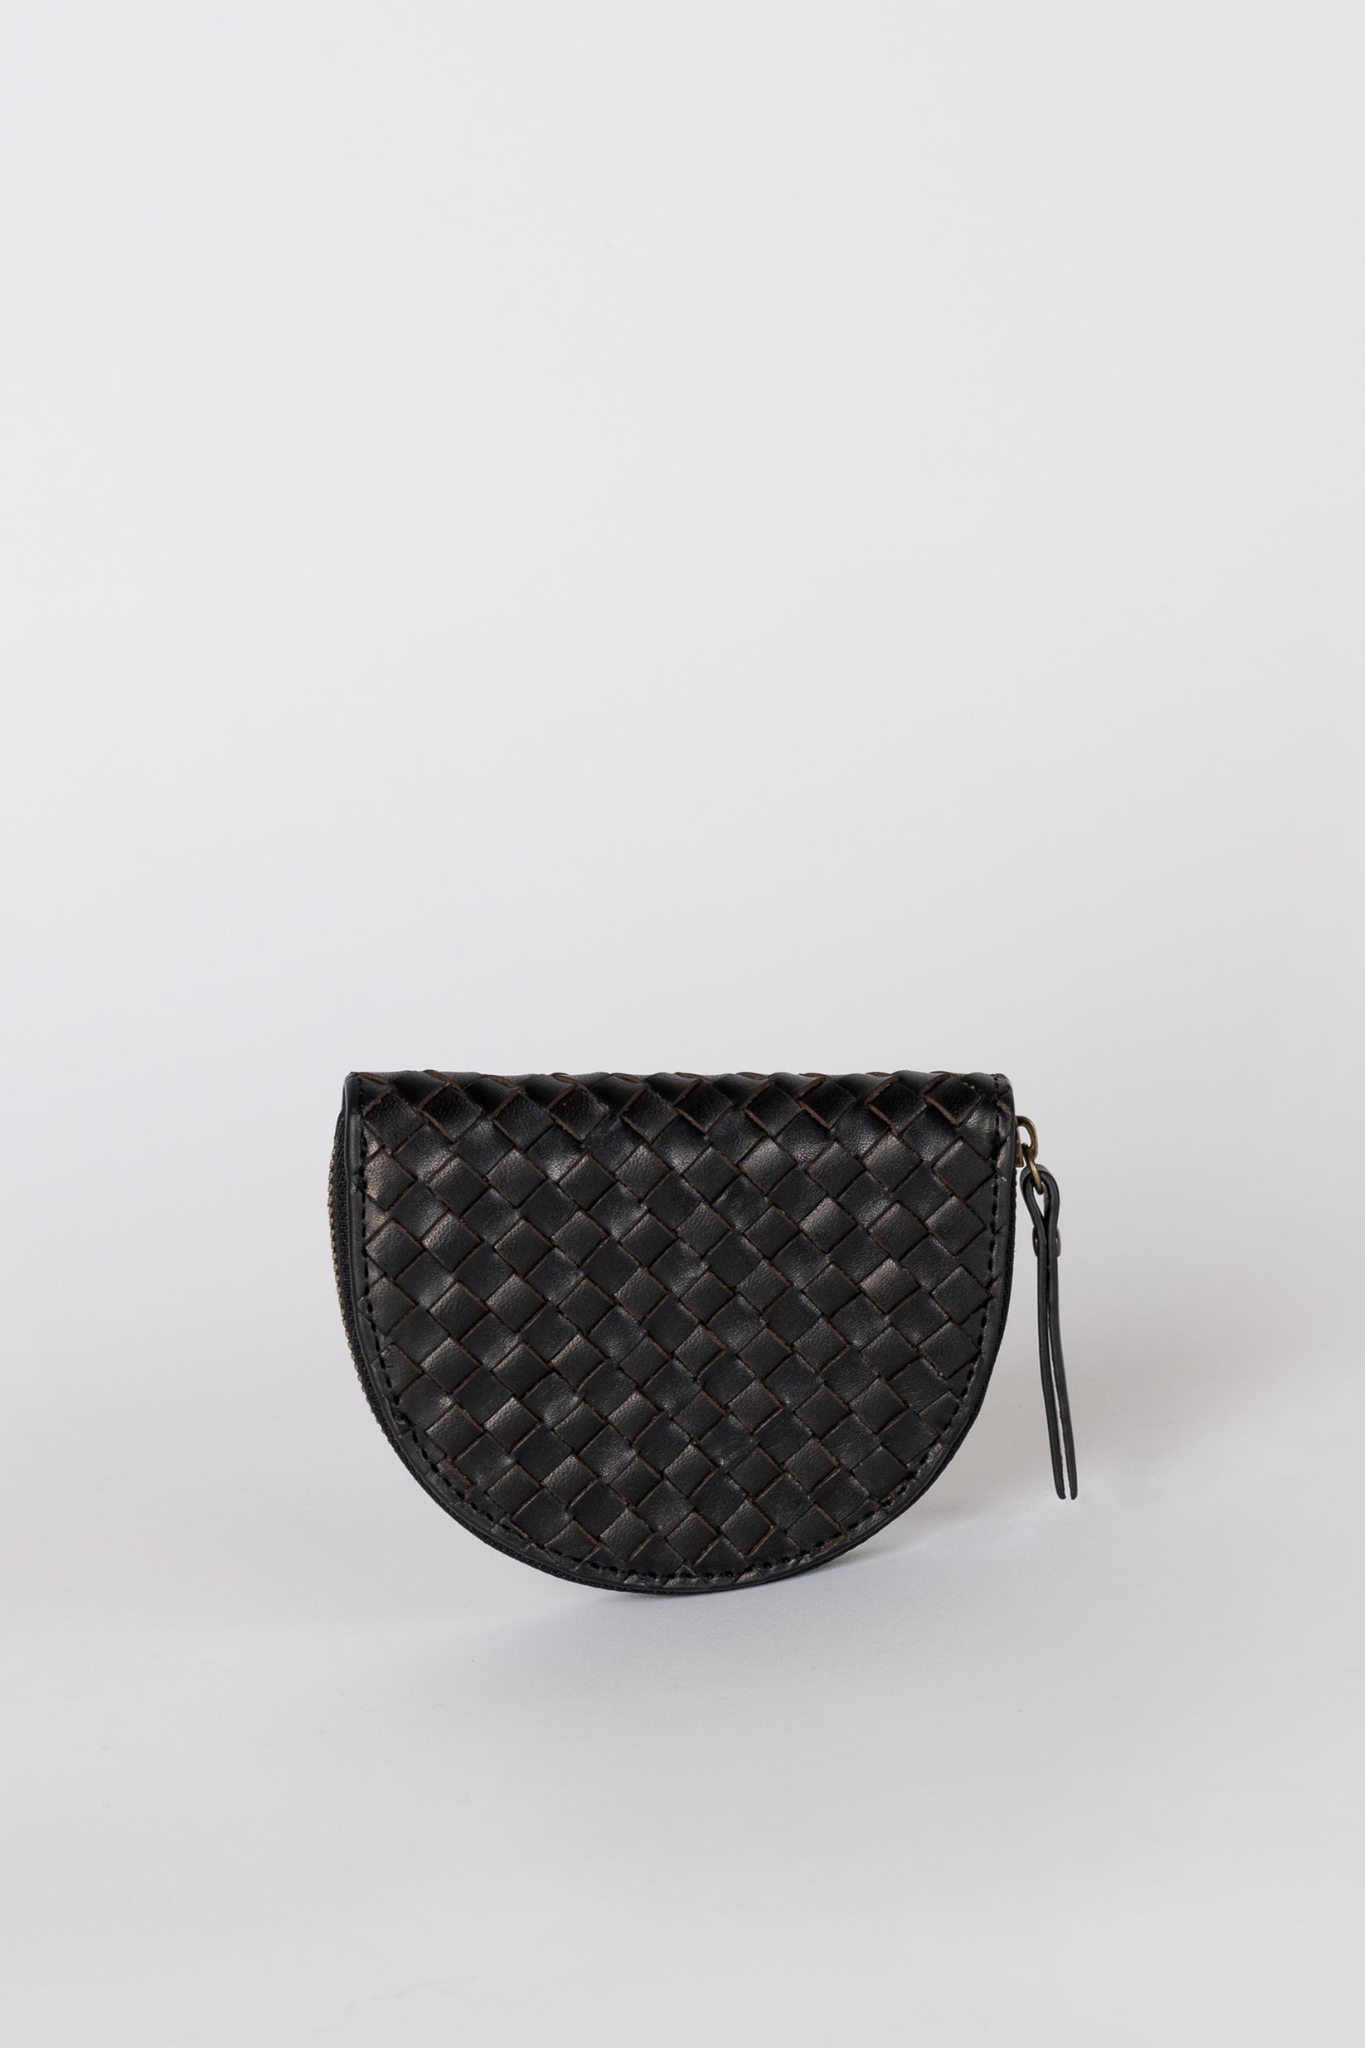 LAURA COIN PURSE - BLACK WOVEN CLASSIC LEATHER